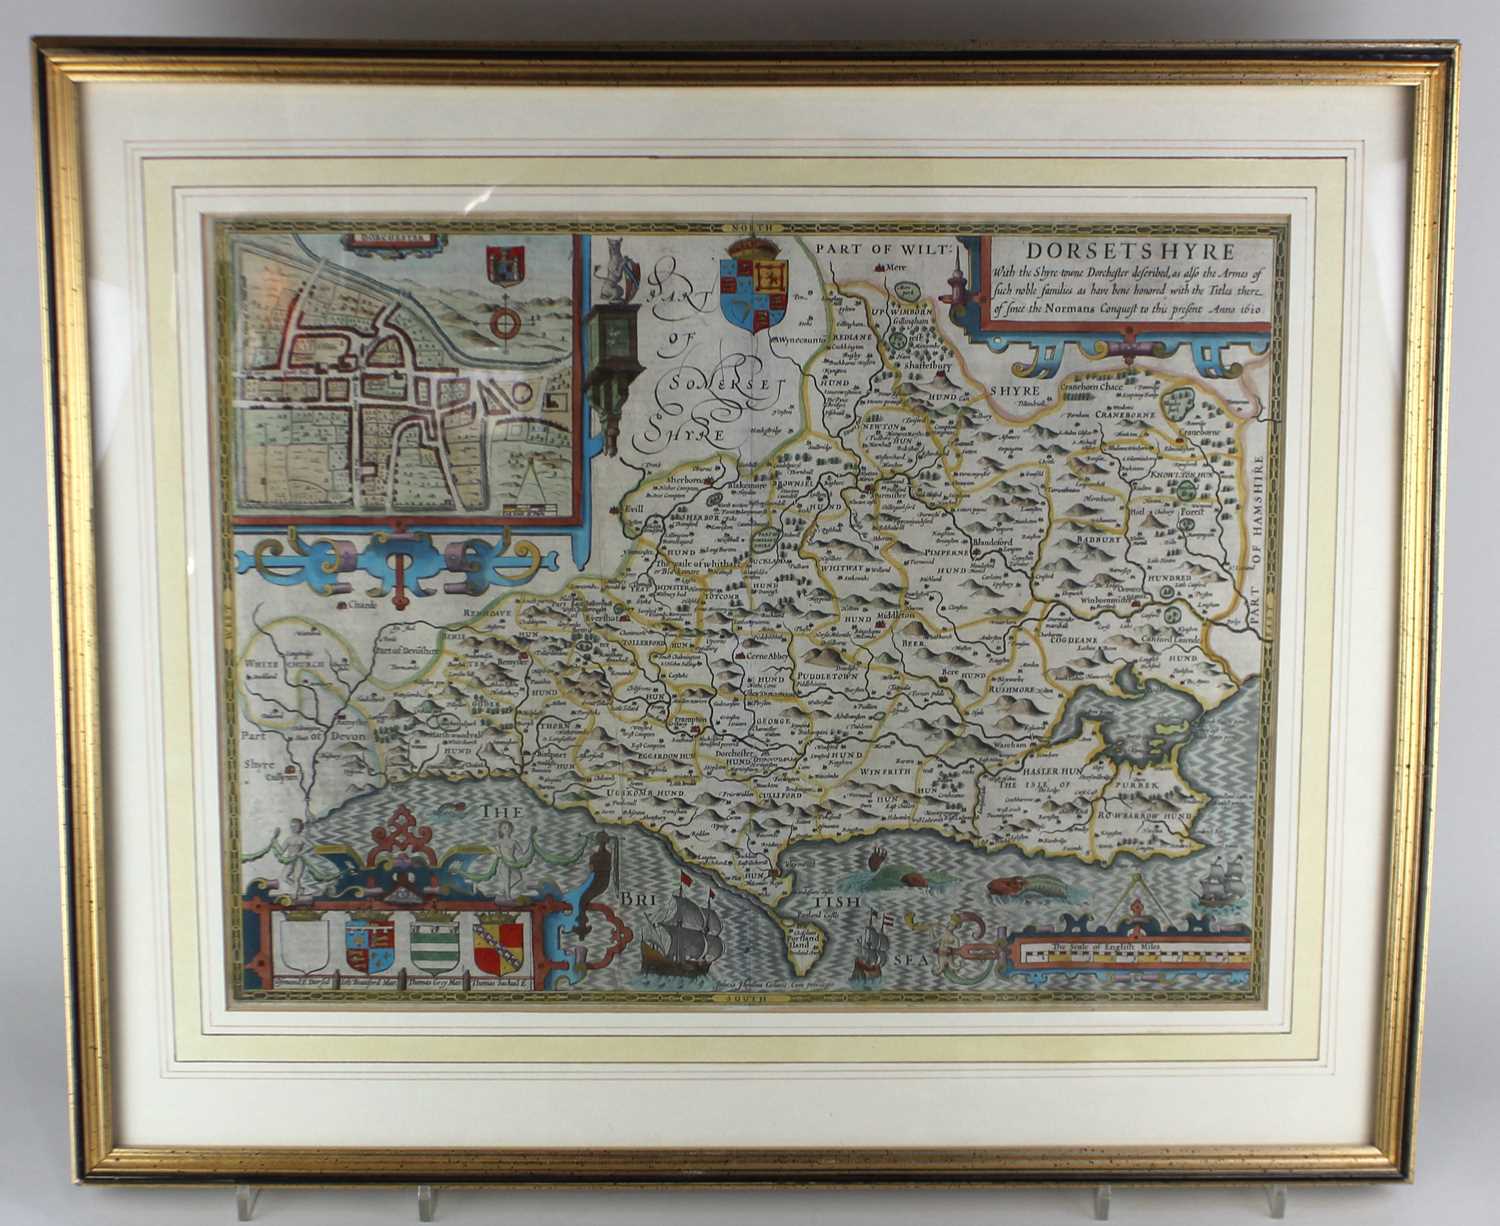 John Speed (1552-1629), 'Dorsetshyre', a hand-coloured engraved map, with a plan of Dorchester, text